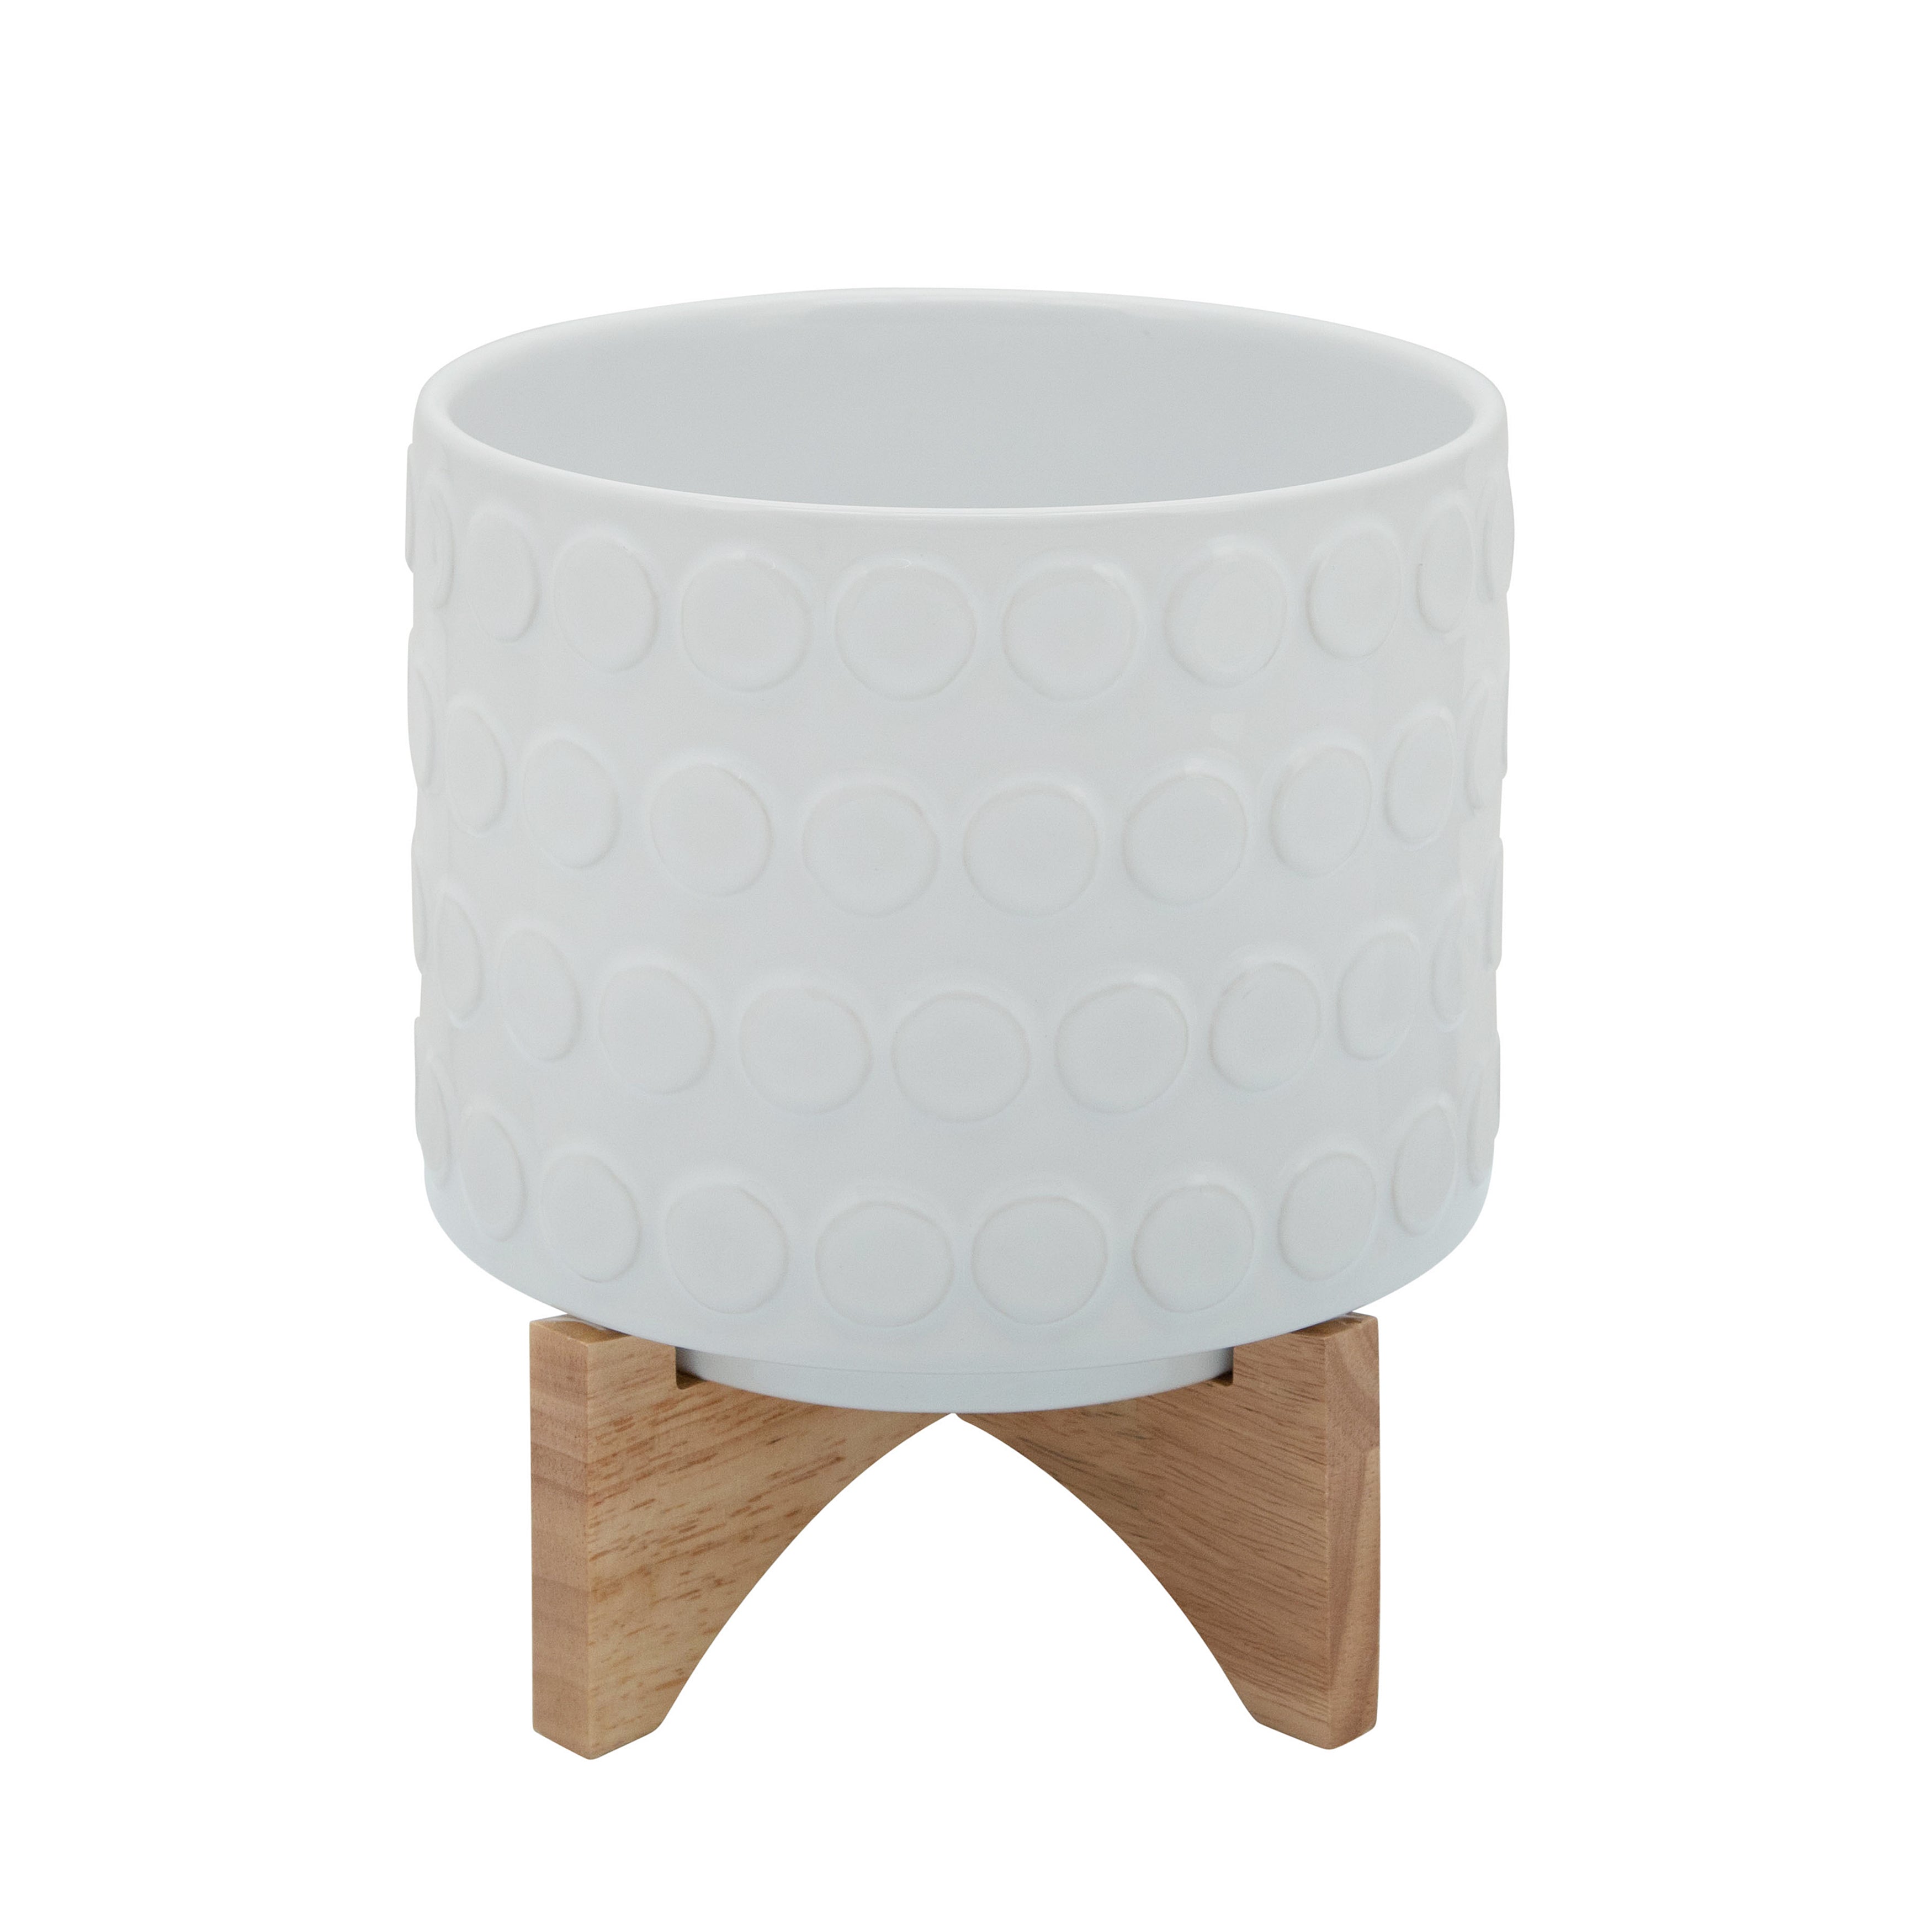 Ceramic 8" Planter On Wooden Stand, White, Planters